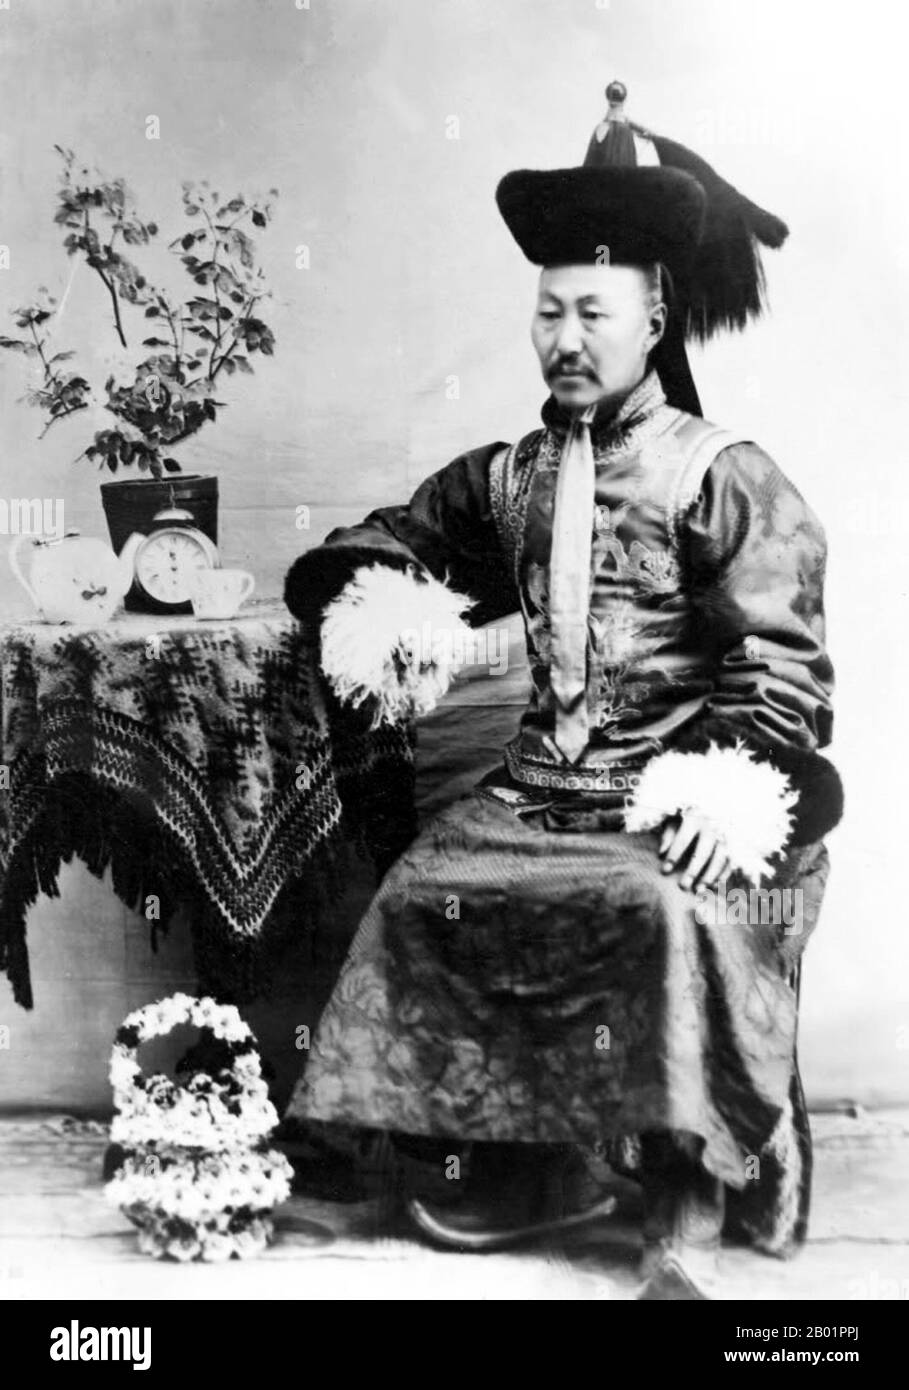 Mongolia: Togtokh Taij (13 May 1864 - April 1922),  Inner Mongolian Gorlos chief and a leader of the Mongolian Revolution of 1911.                                         The Mongolian Revolution of 1911 occurred when the region of Outer Mongolia declared its independence from Qing Dynasty China during the Xinhai Revolution. A combination of factors led many in China to be unhappy with the government. When a new program to settle Mongolia with ethnic Han and assimilate the natives was unveiled, it was met with resistance that resulted in a relatively bloodless separation from the Qing Empire. Stock Photo